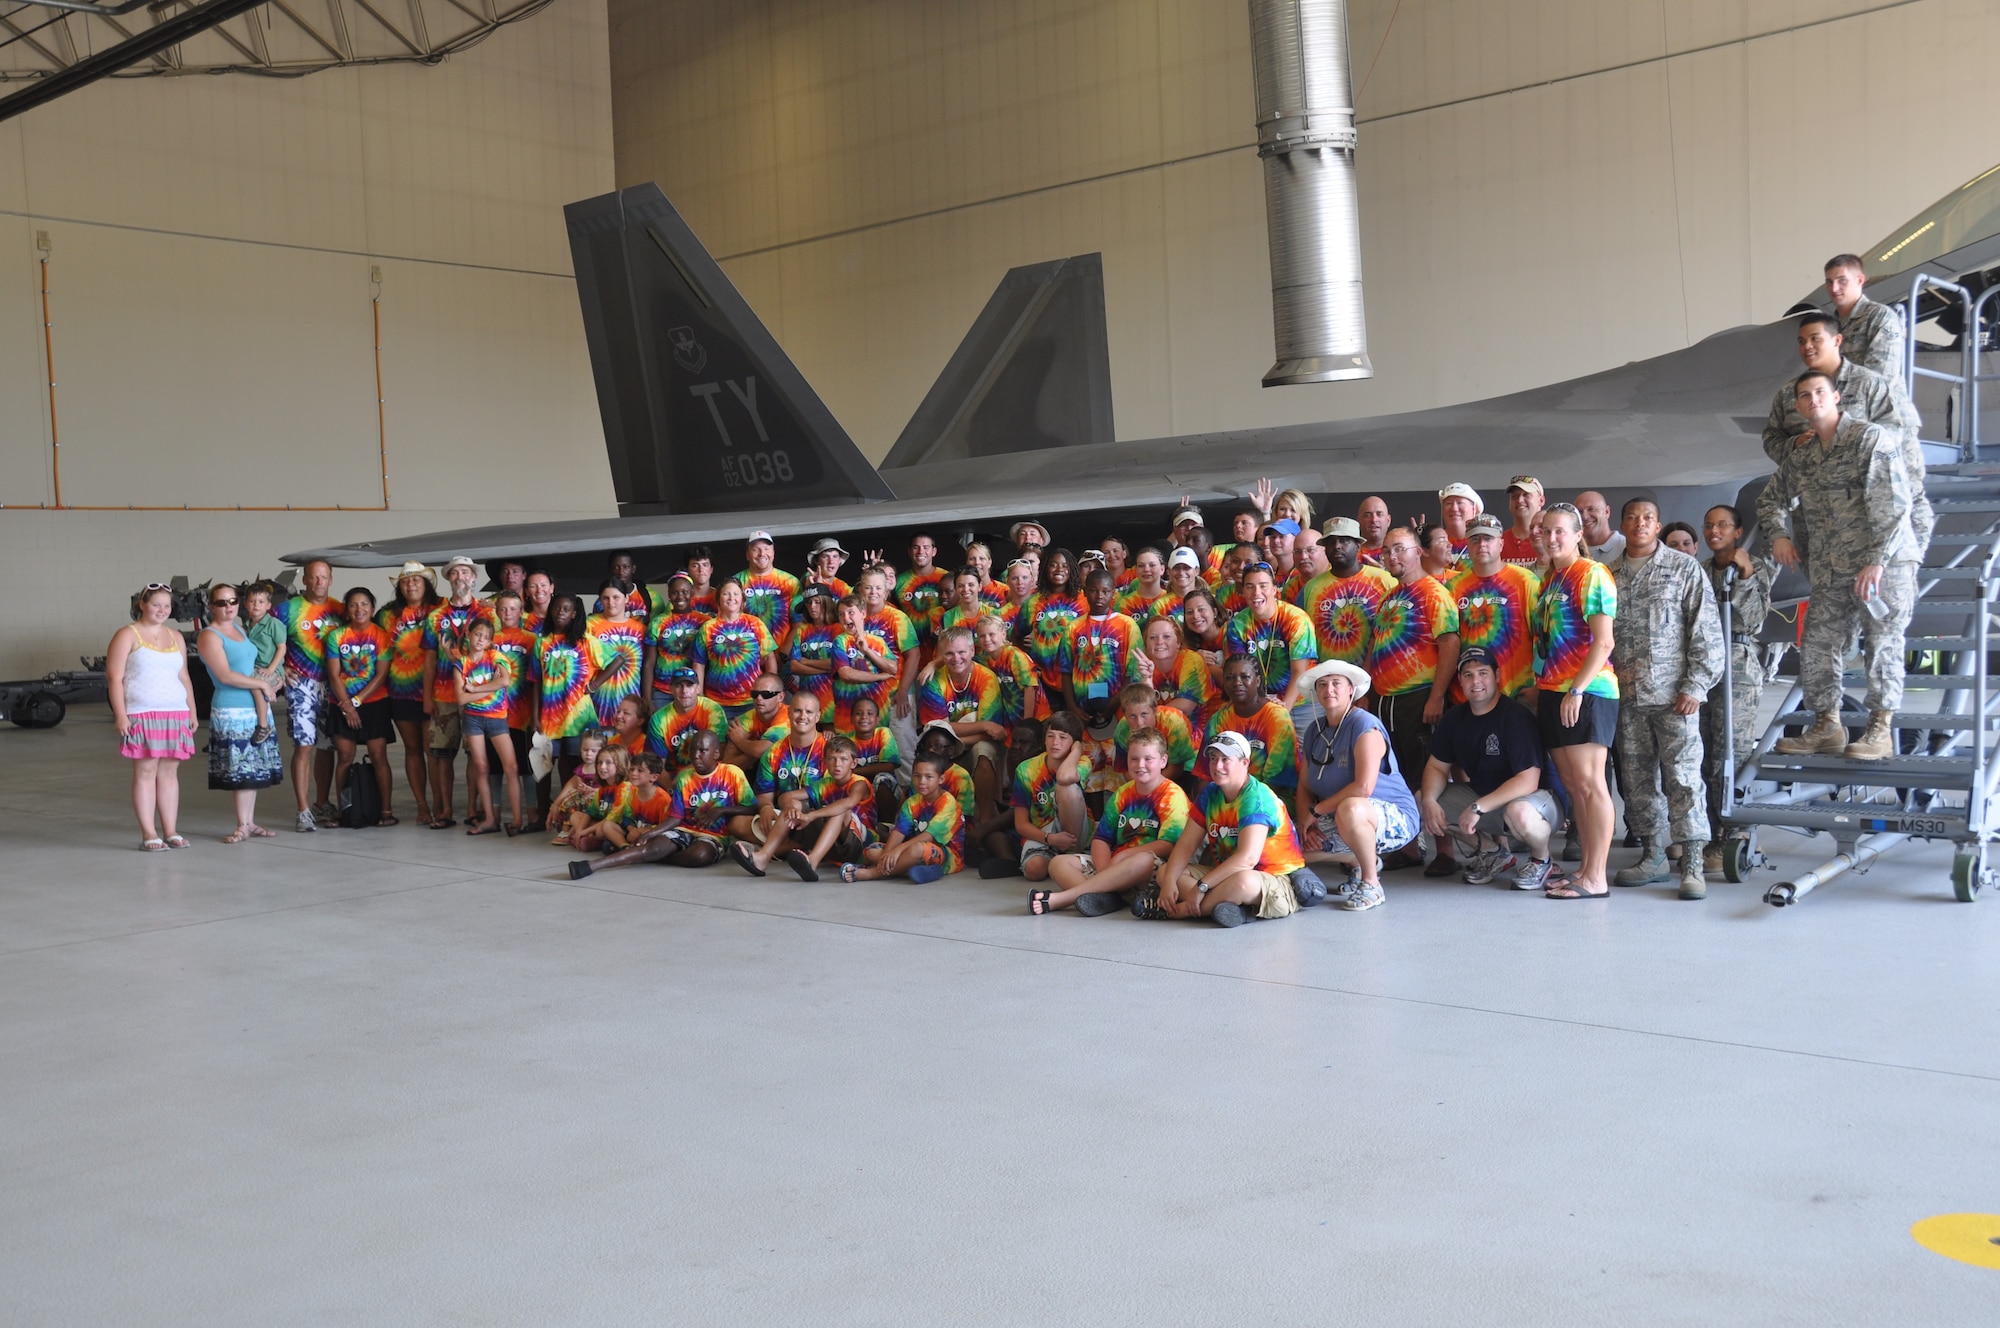 Camp Amigo staff and burn survivors pose for a group photo by a F-22 Raptor while touring Tyndall July 15.  (U.S. Air Force photo/Senior Airman Veronica McMahon)